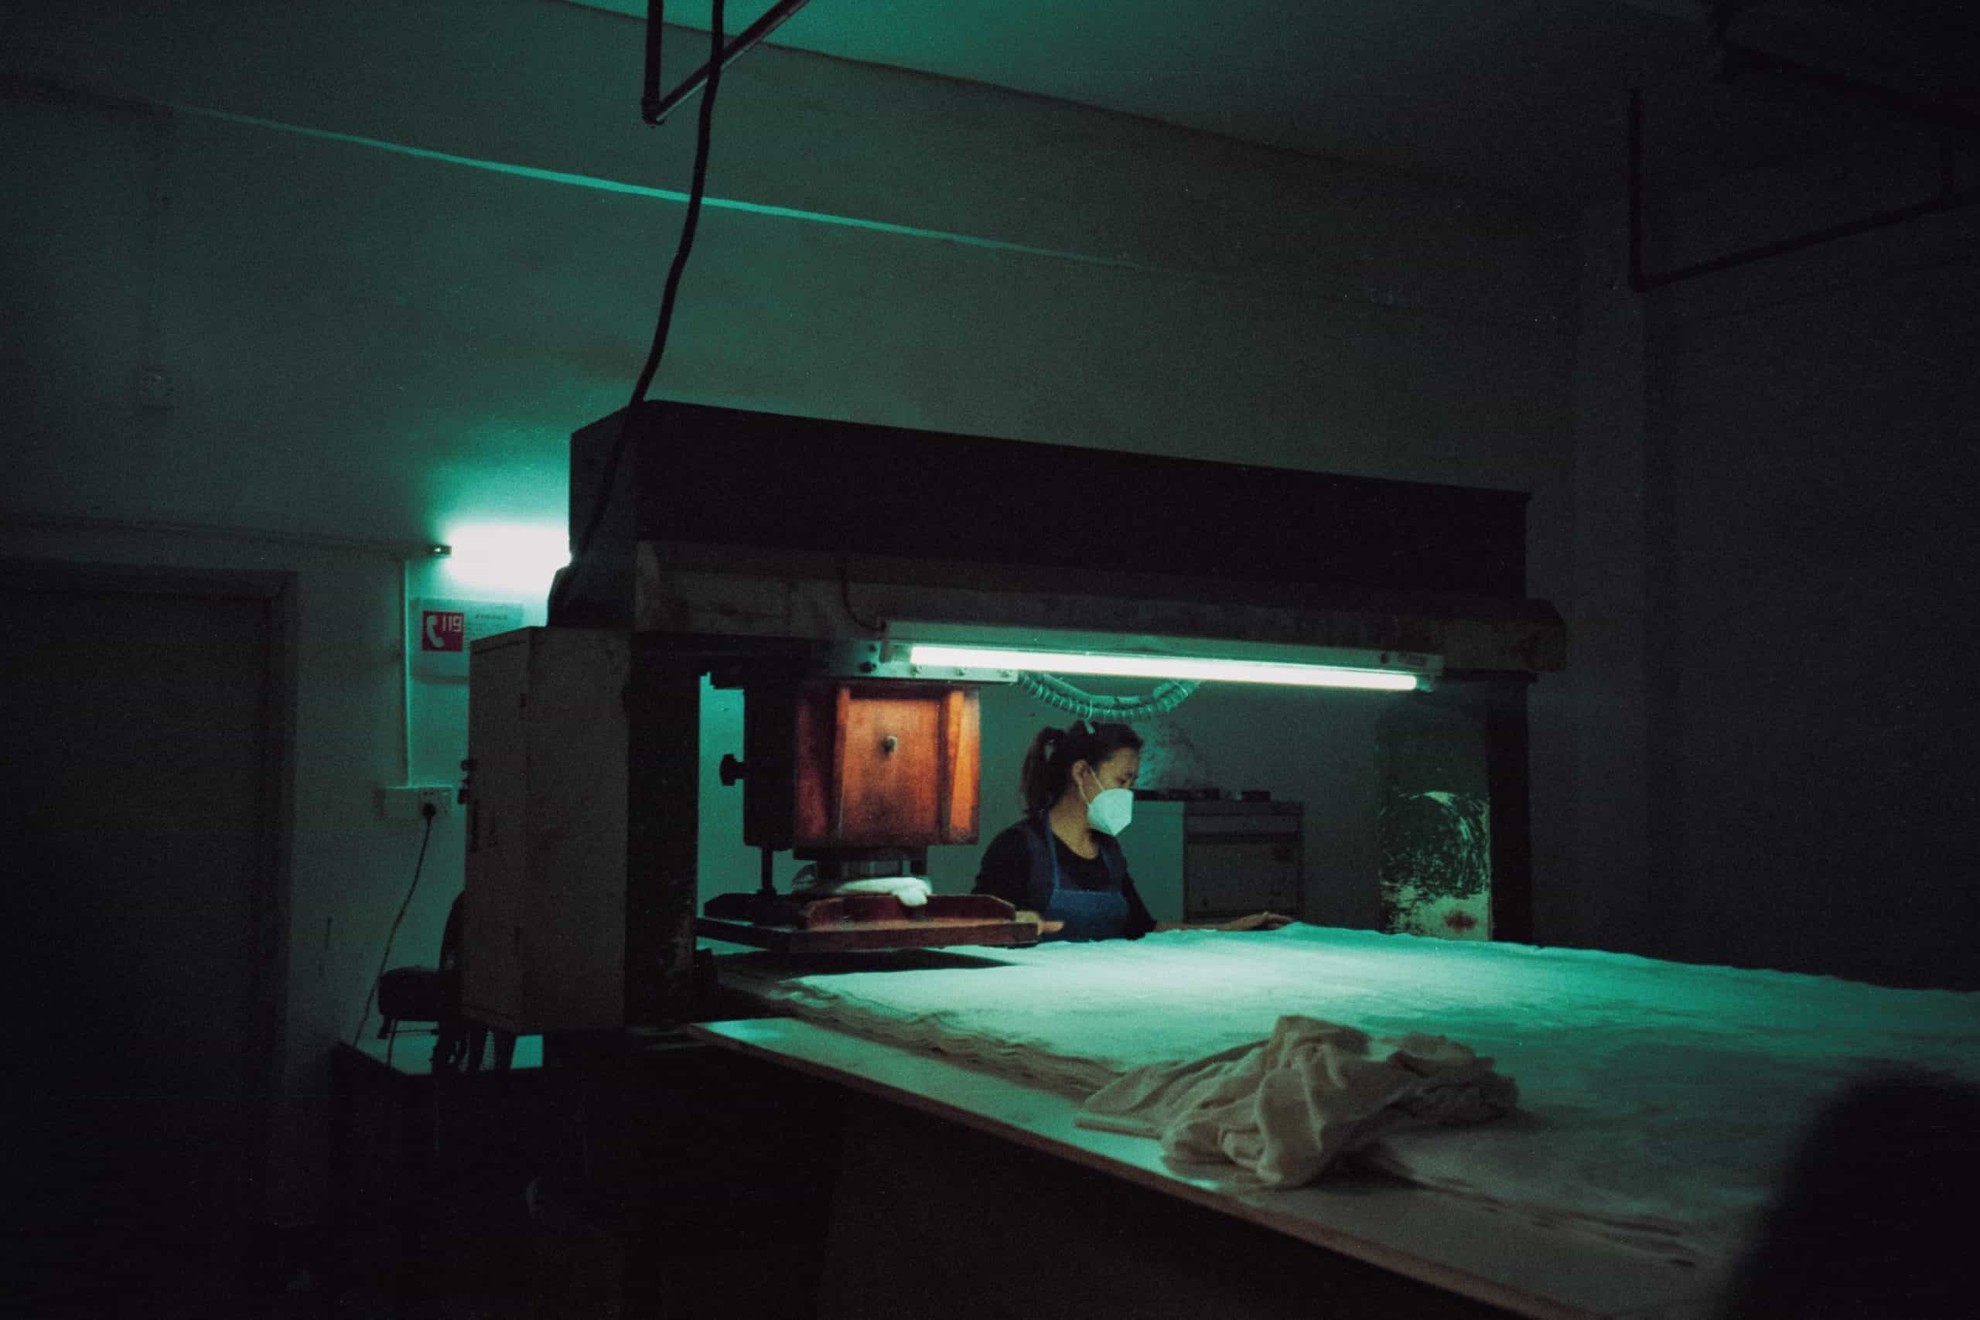 Factory worker, China